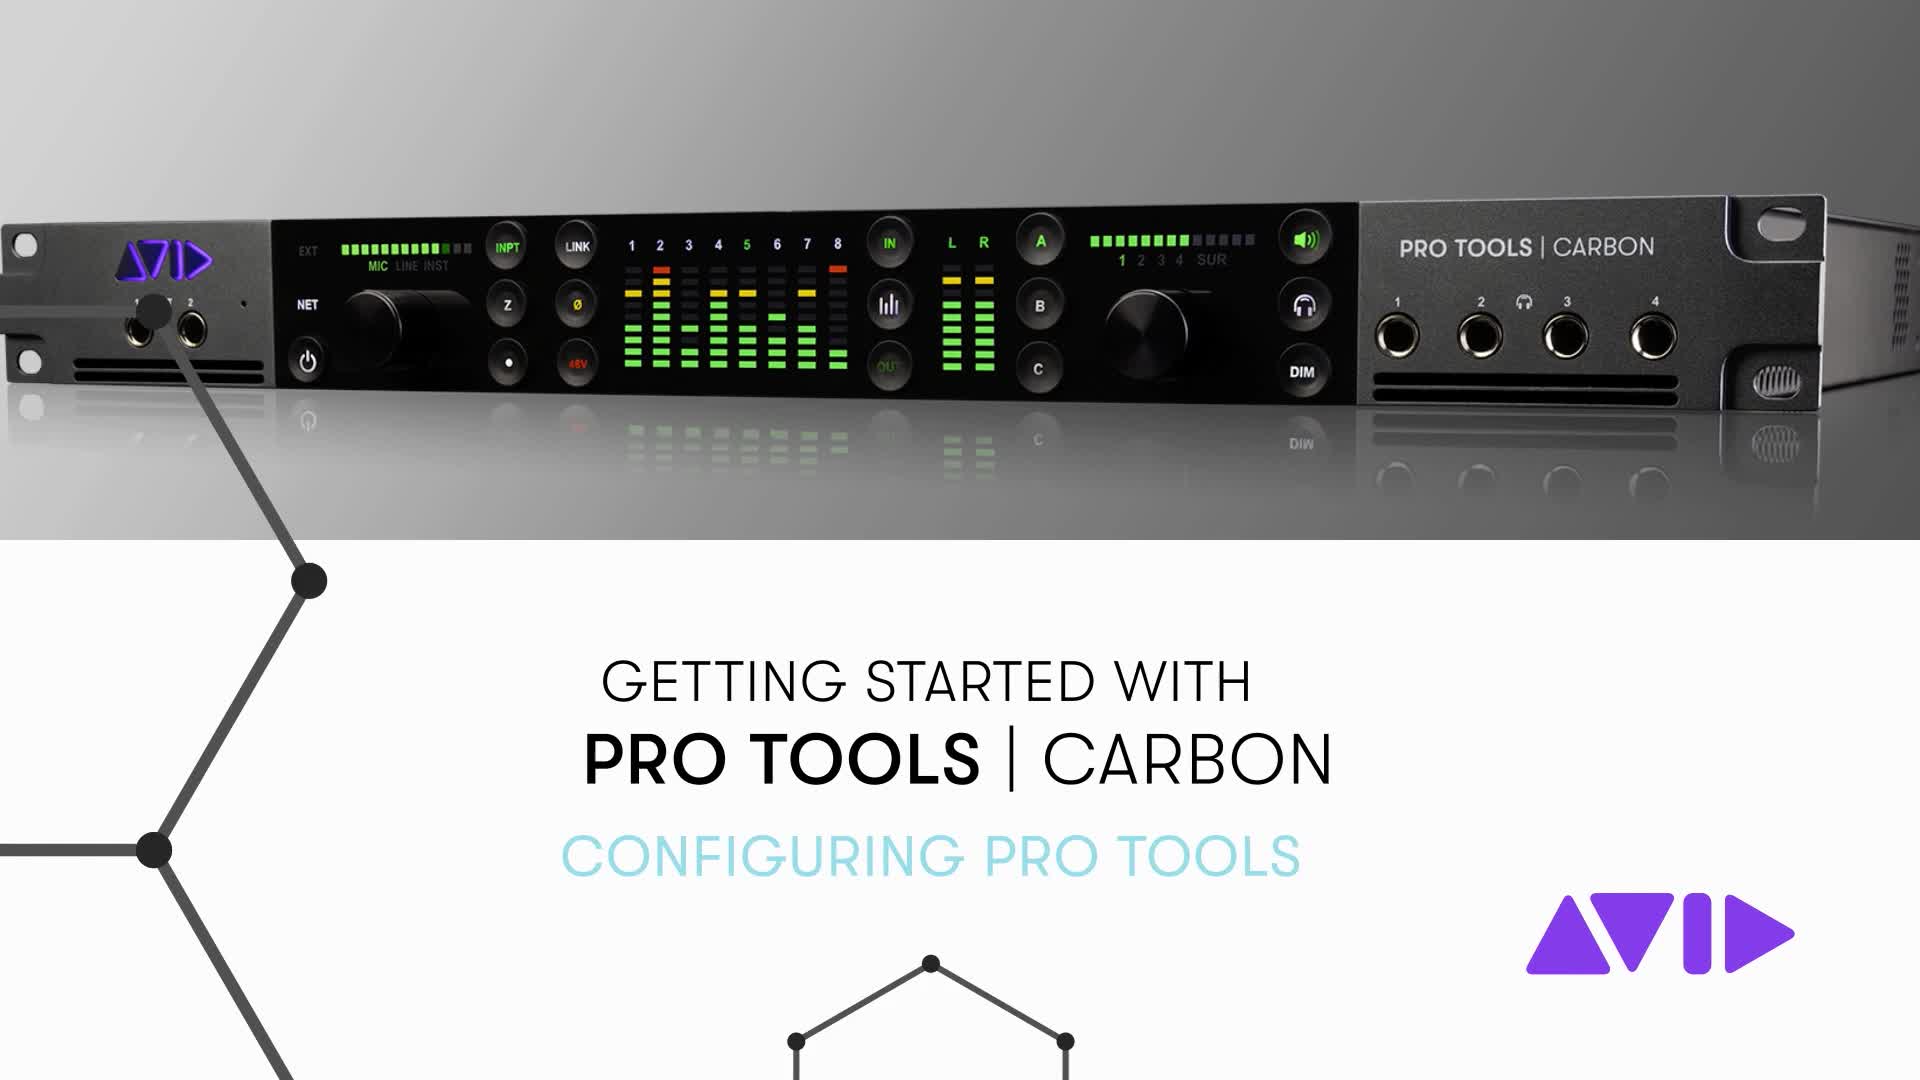 04 Pro Tools Carbon Getting Started – Configuring Pro Tools